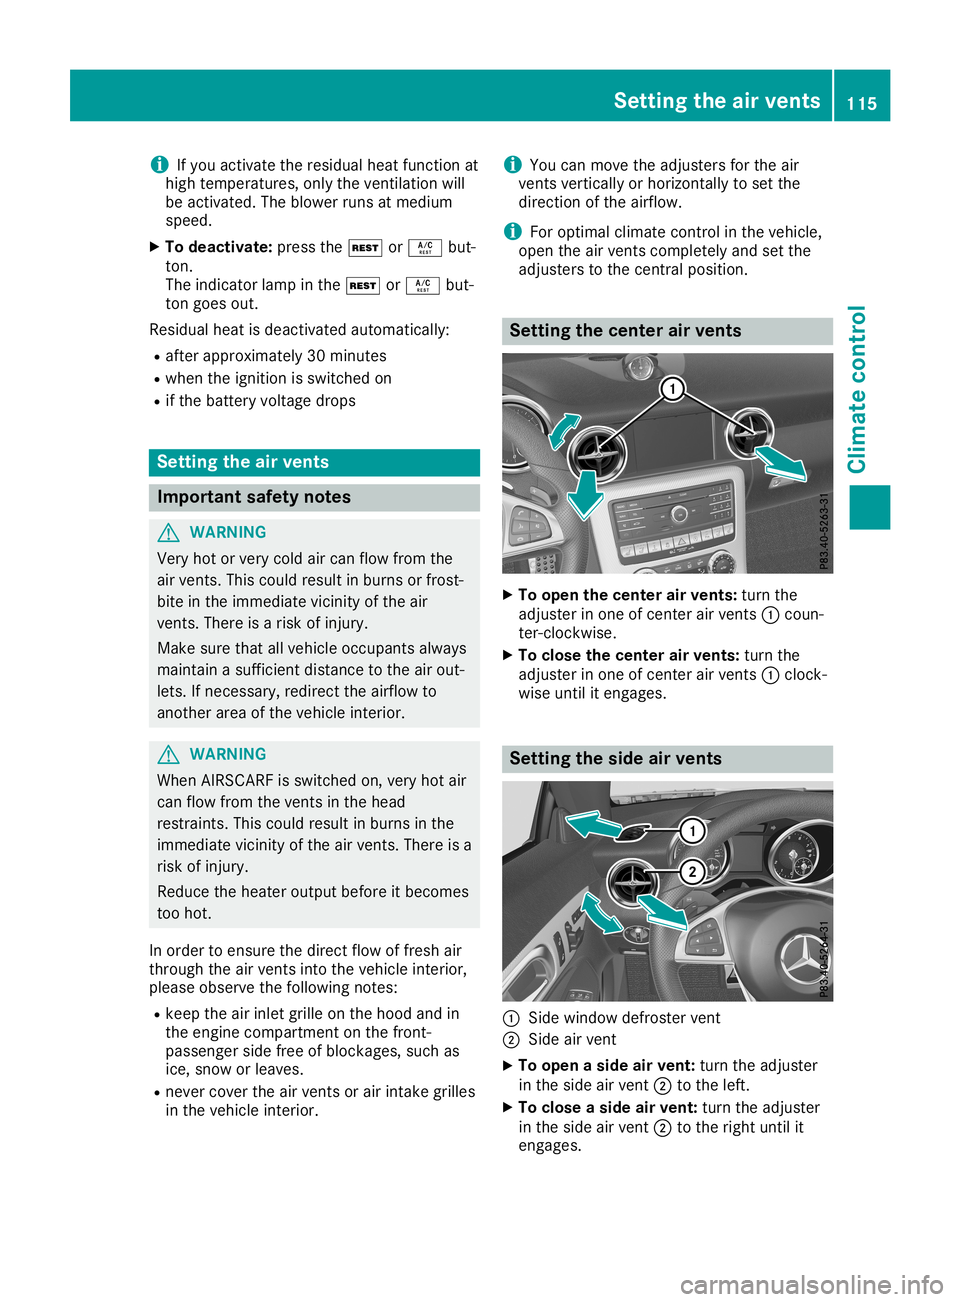 MERCEDES-BENZ SLC ROADSTER 2019  Owners Manual i
If
you activate theresidu alheat function at
high temperature s,only theventilation will
be activated. Theblow erruns atmediu m
speed .
X To deactivate: pressthe004B or0056 but-
ton.
The indicator l